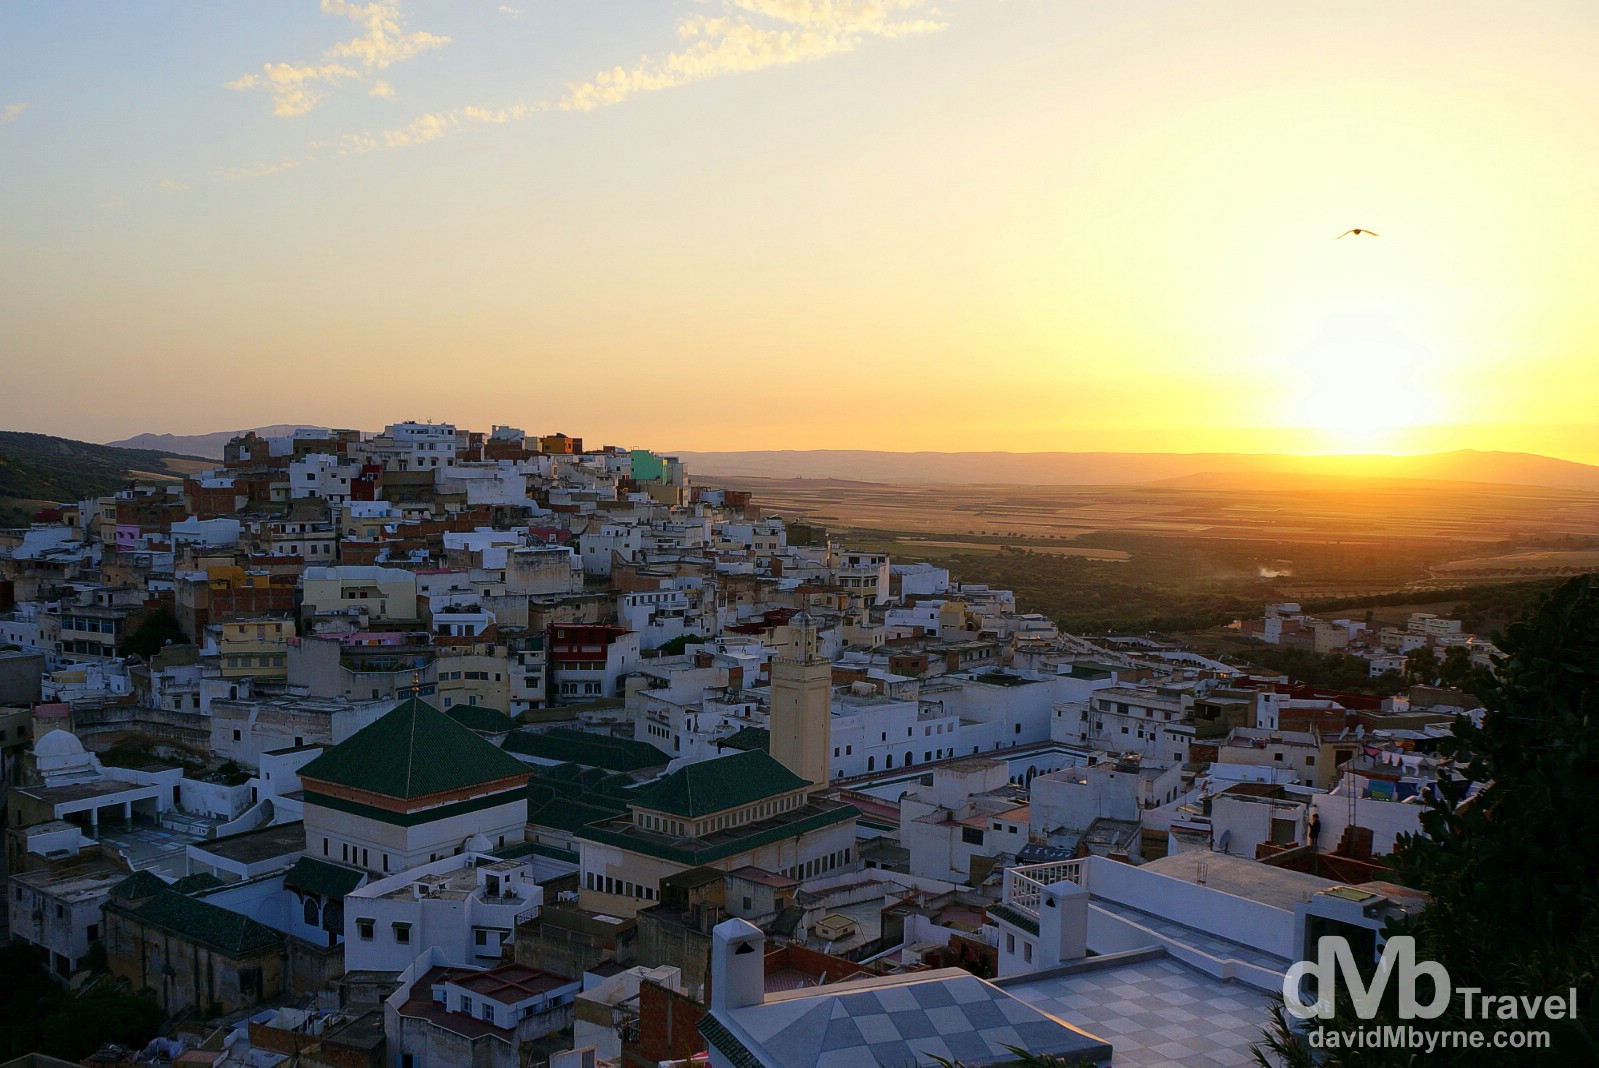 Sunset as seen from the grand terrase (grand terrace) in Moulay Idriss, Morocco. May 26th, 2014.